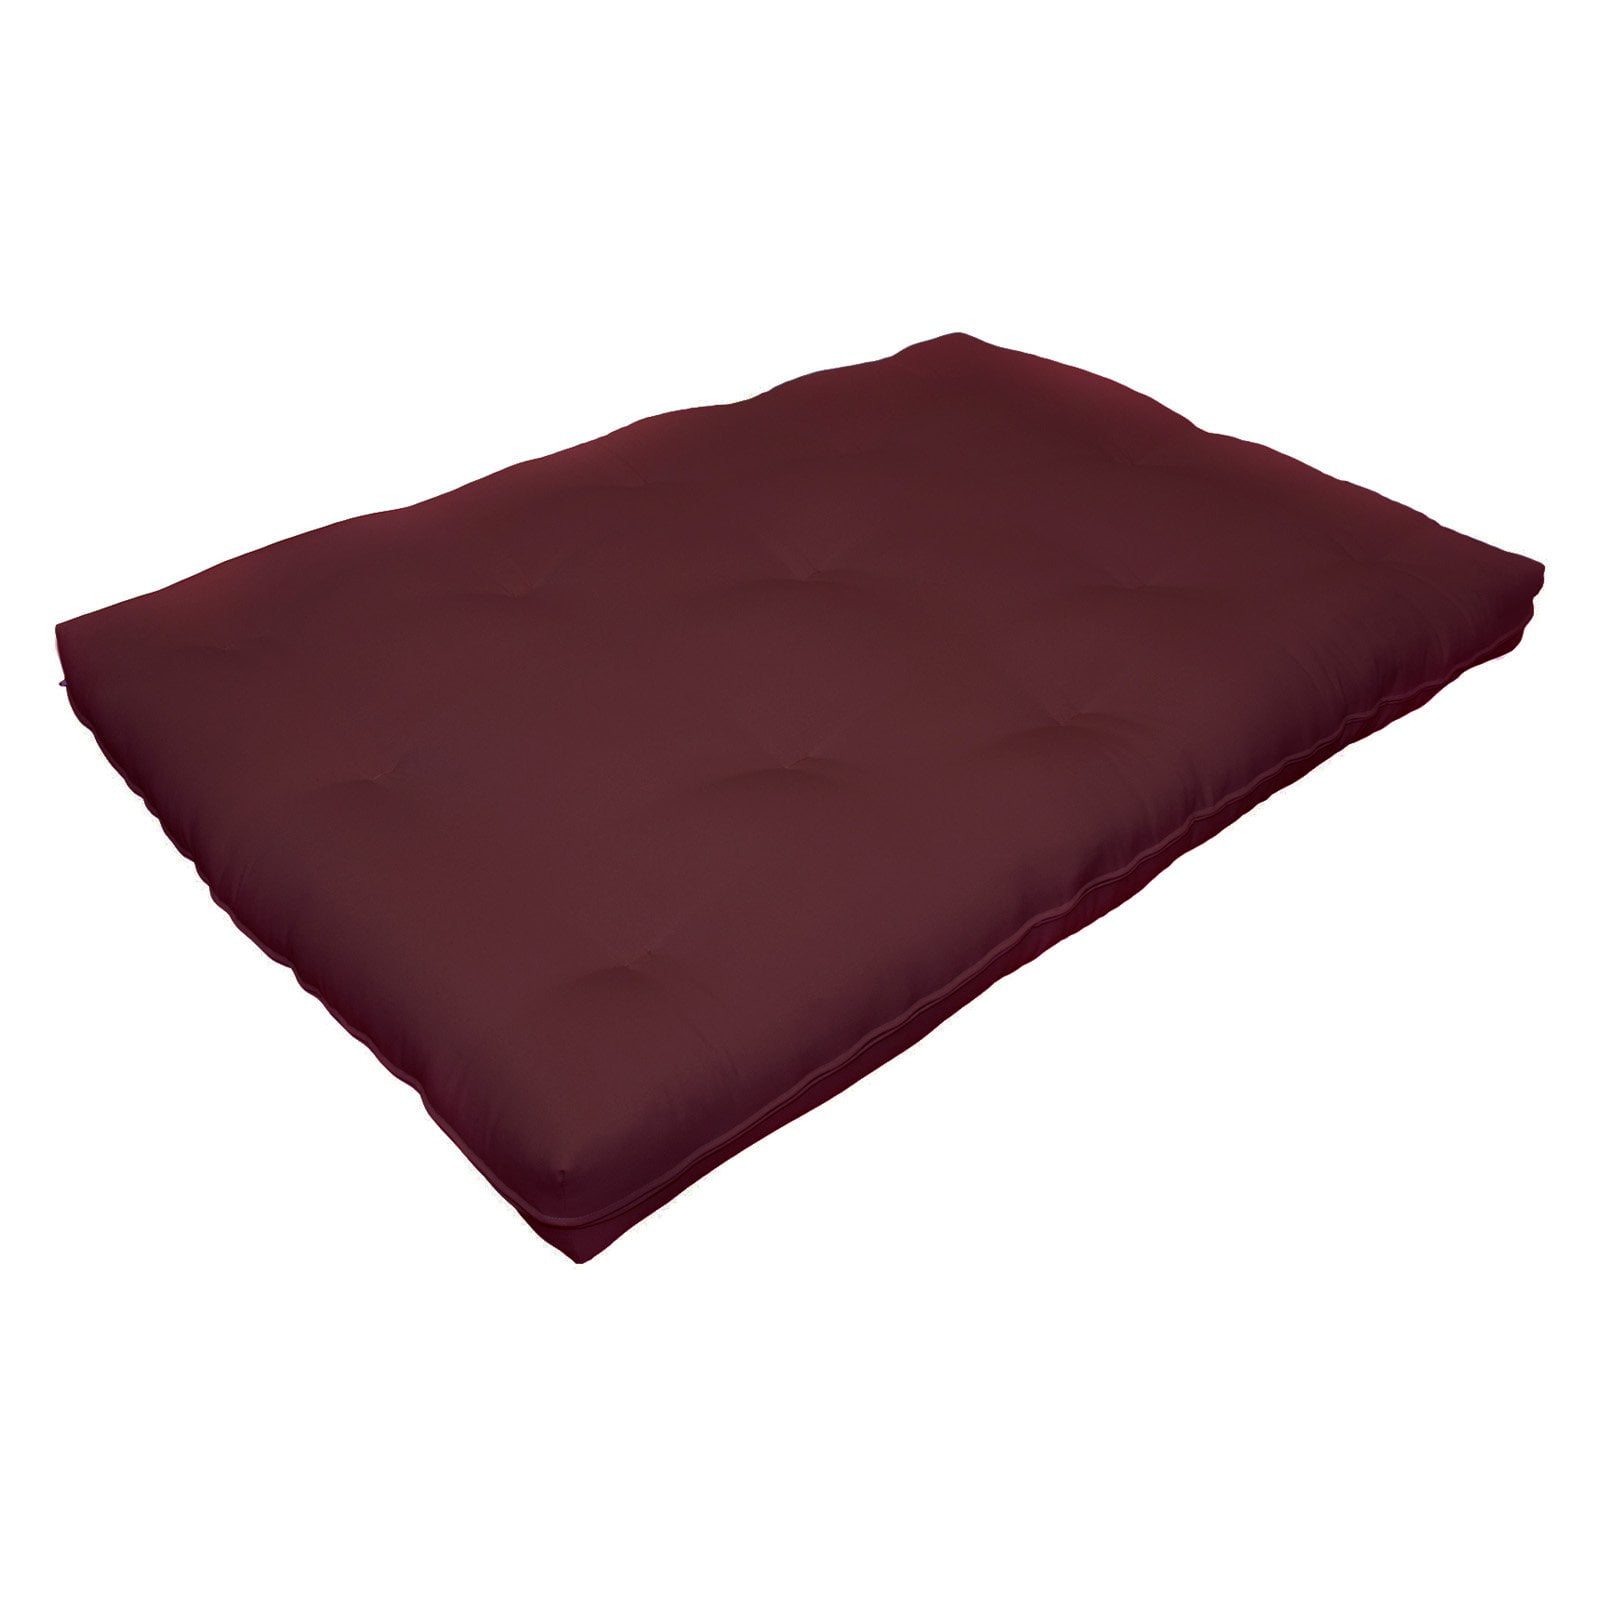 Milton Green Stars 8-Inch Replacement Futon Pad, Full-Size-Color:Burgundy 